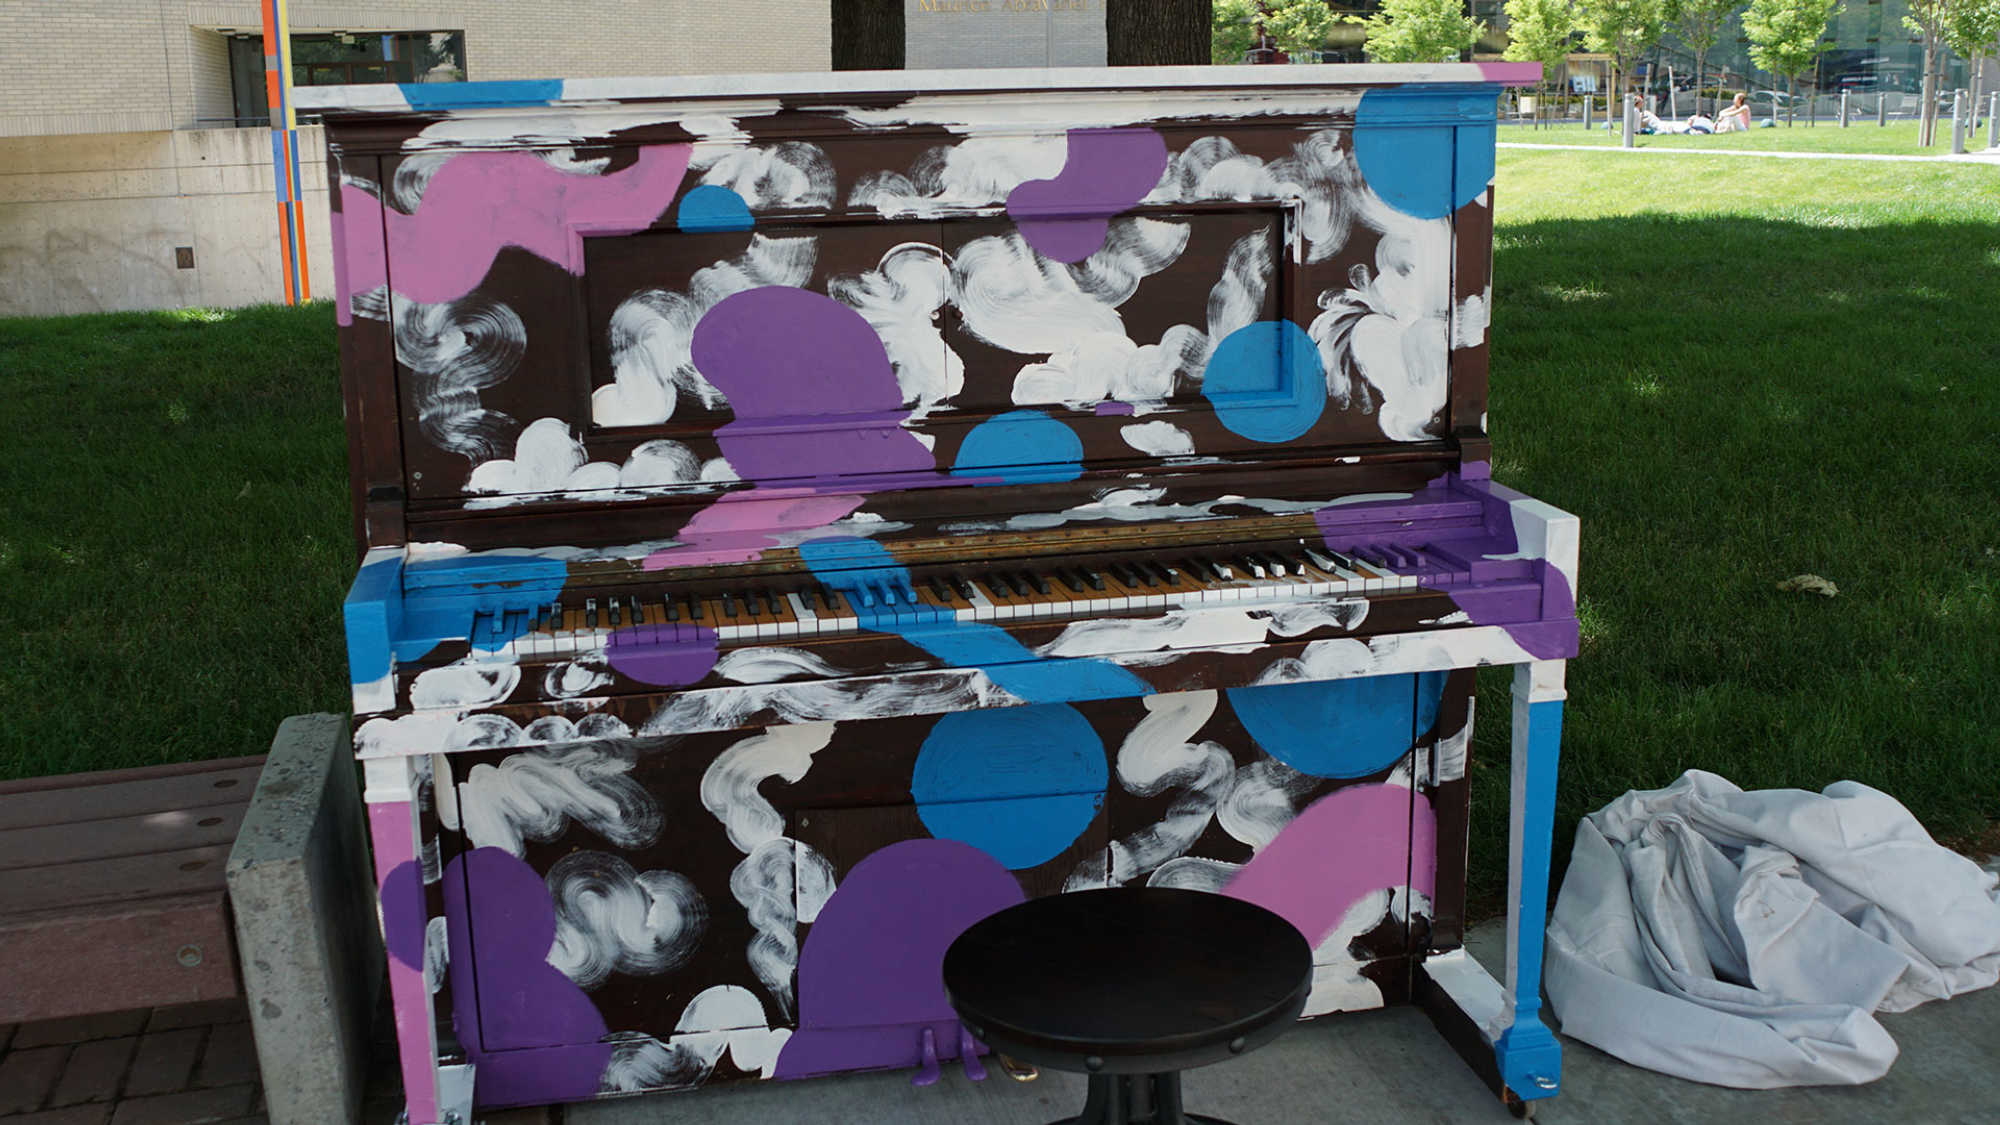 The finished piano.